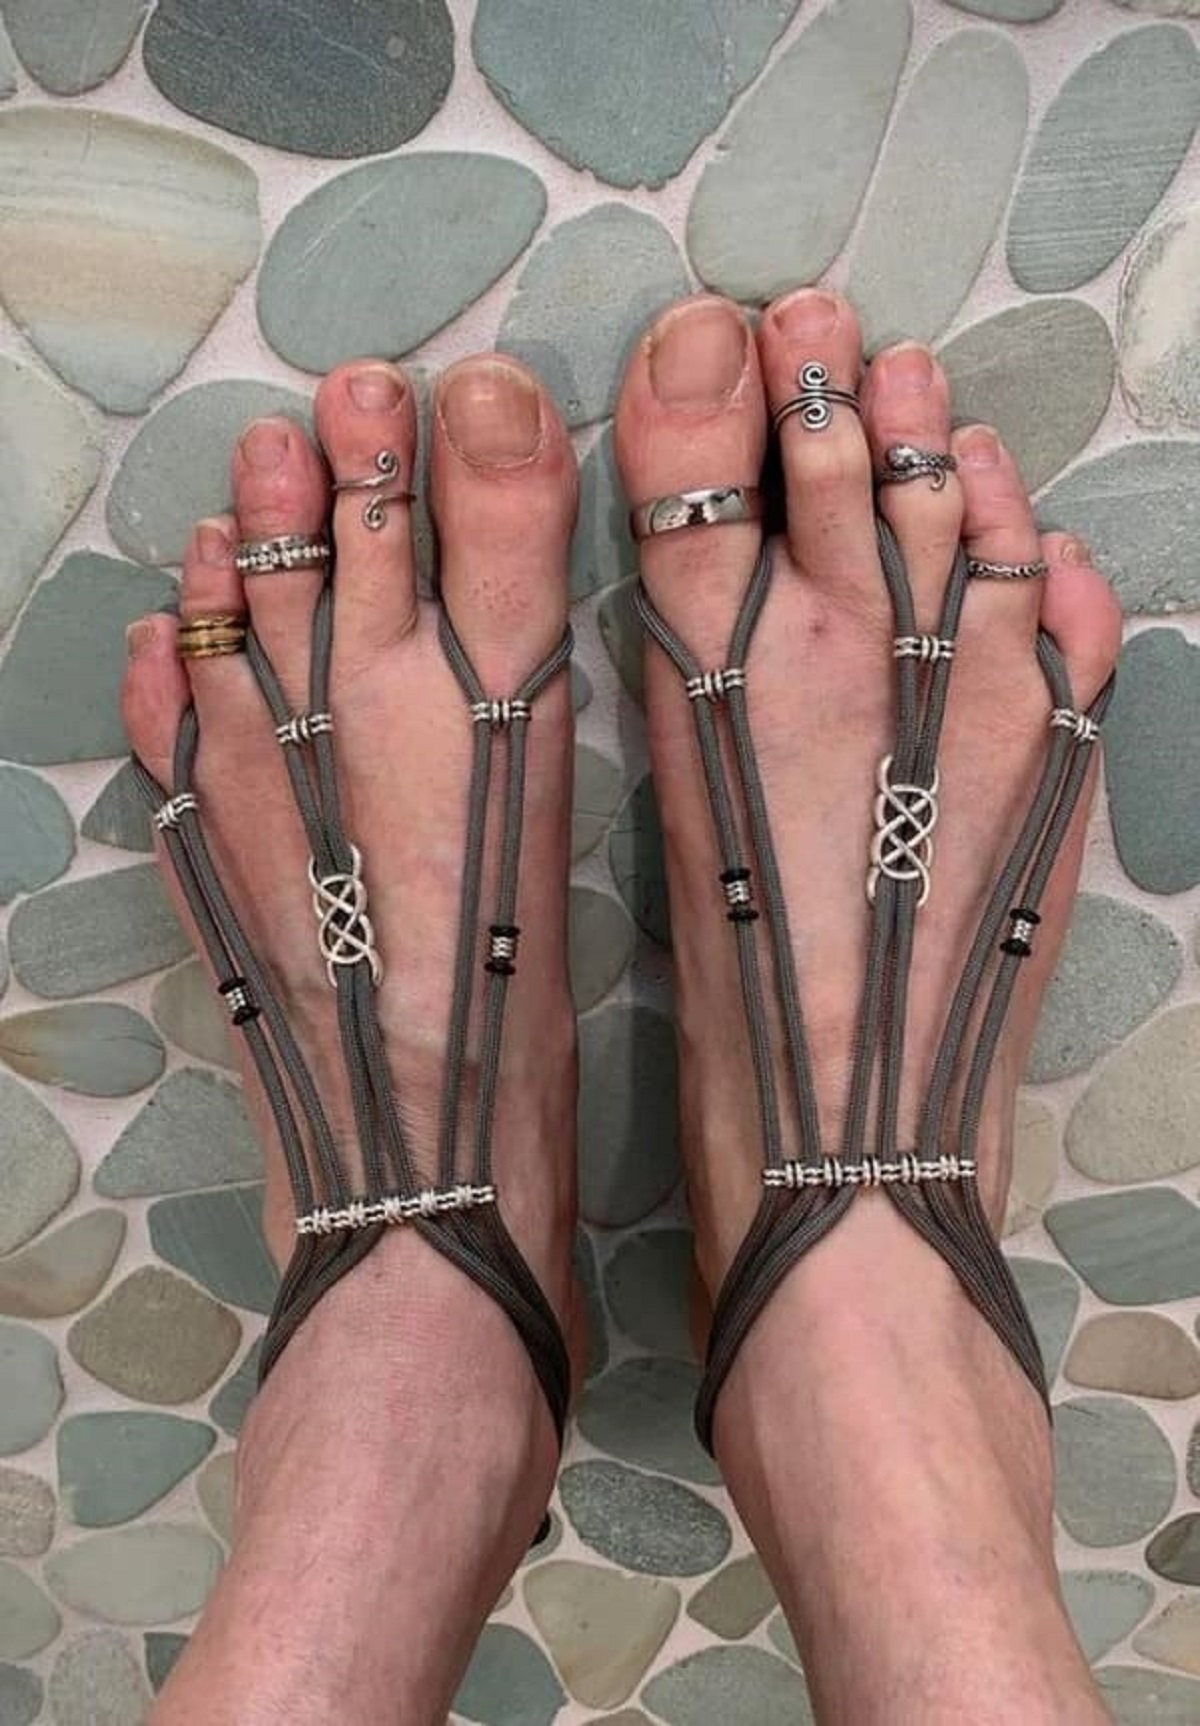 “My most recent Etsy recommendation, barefoot sandals”